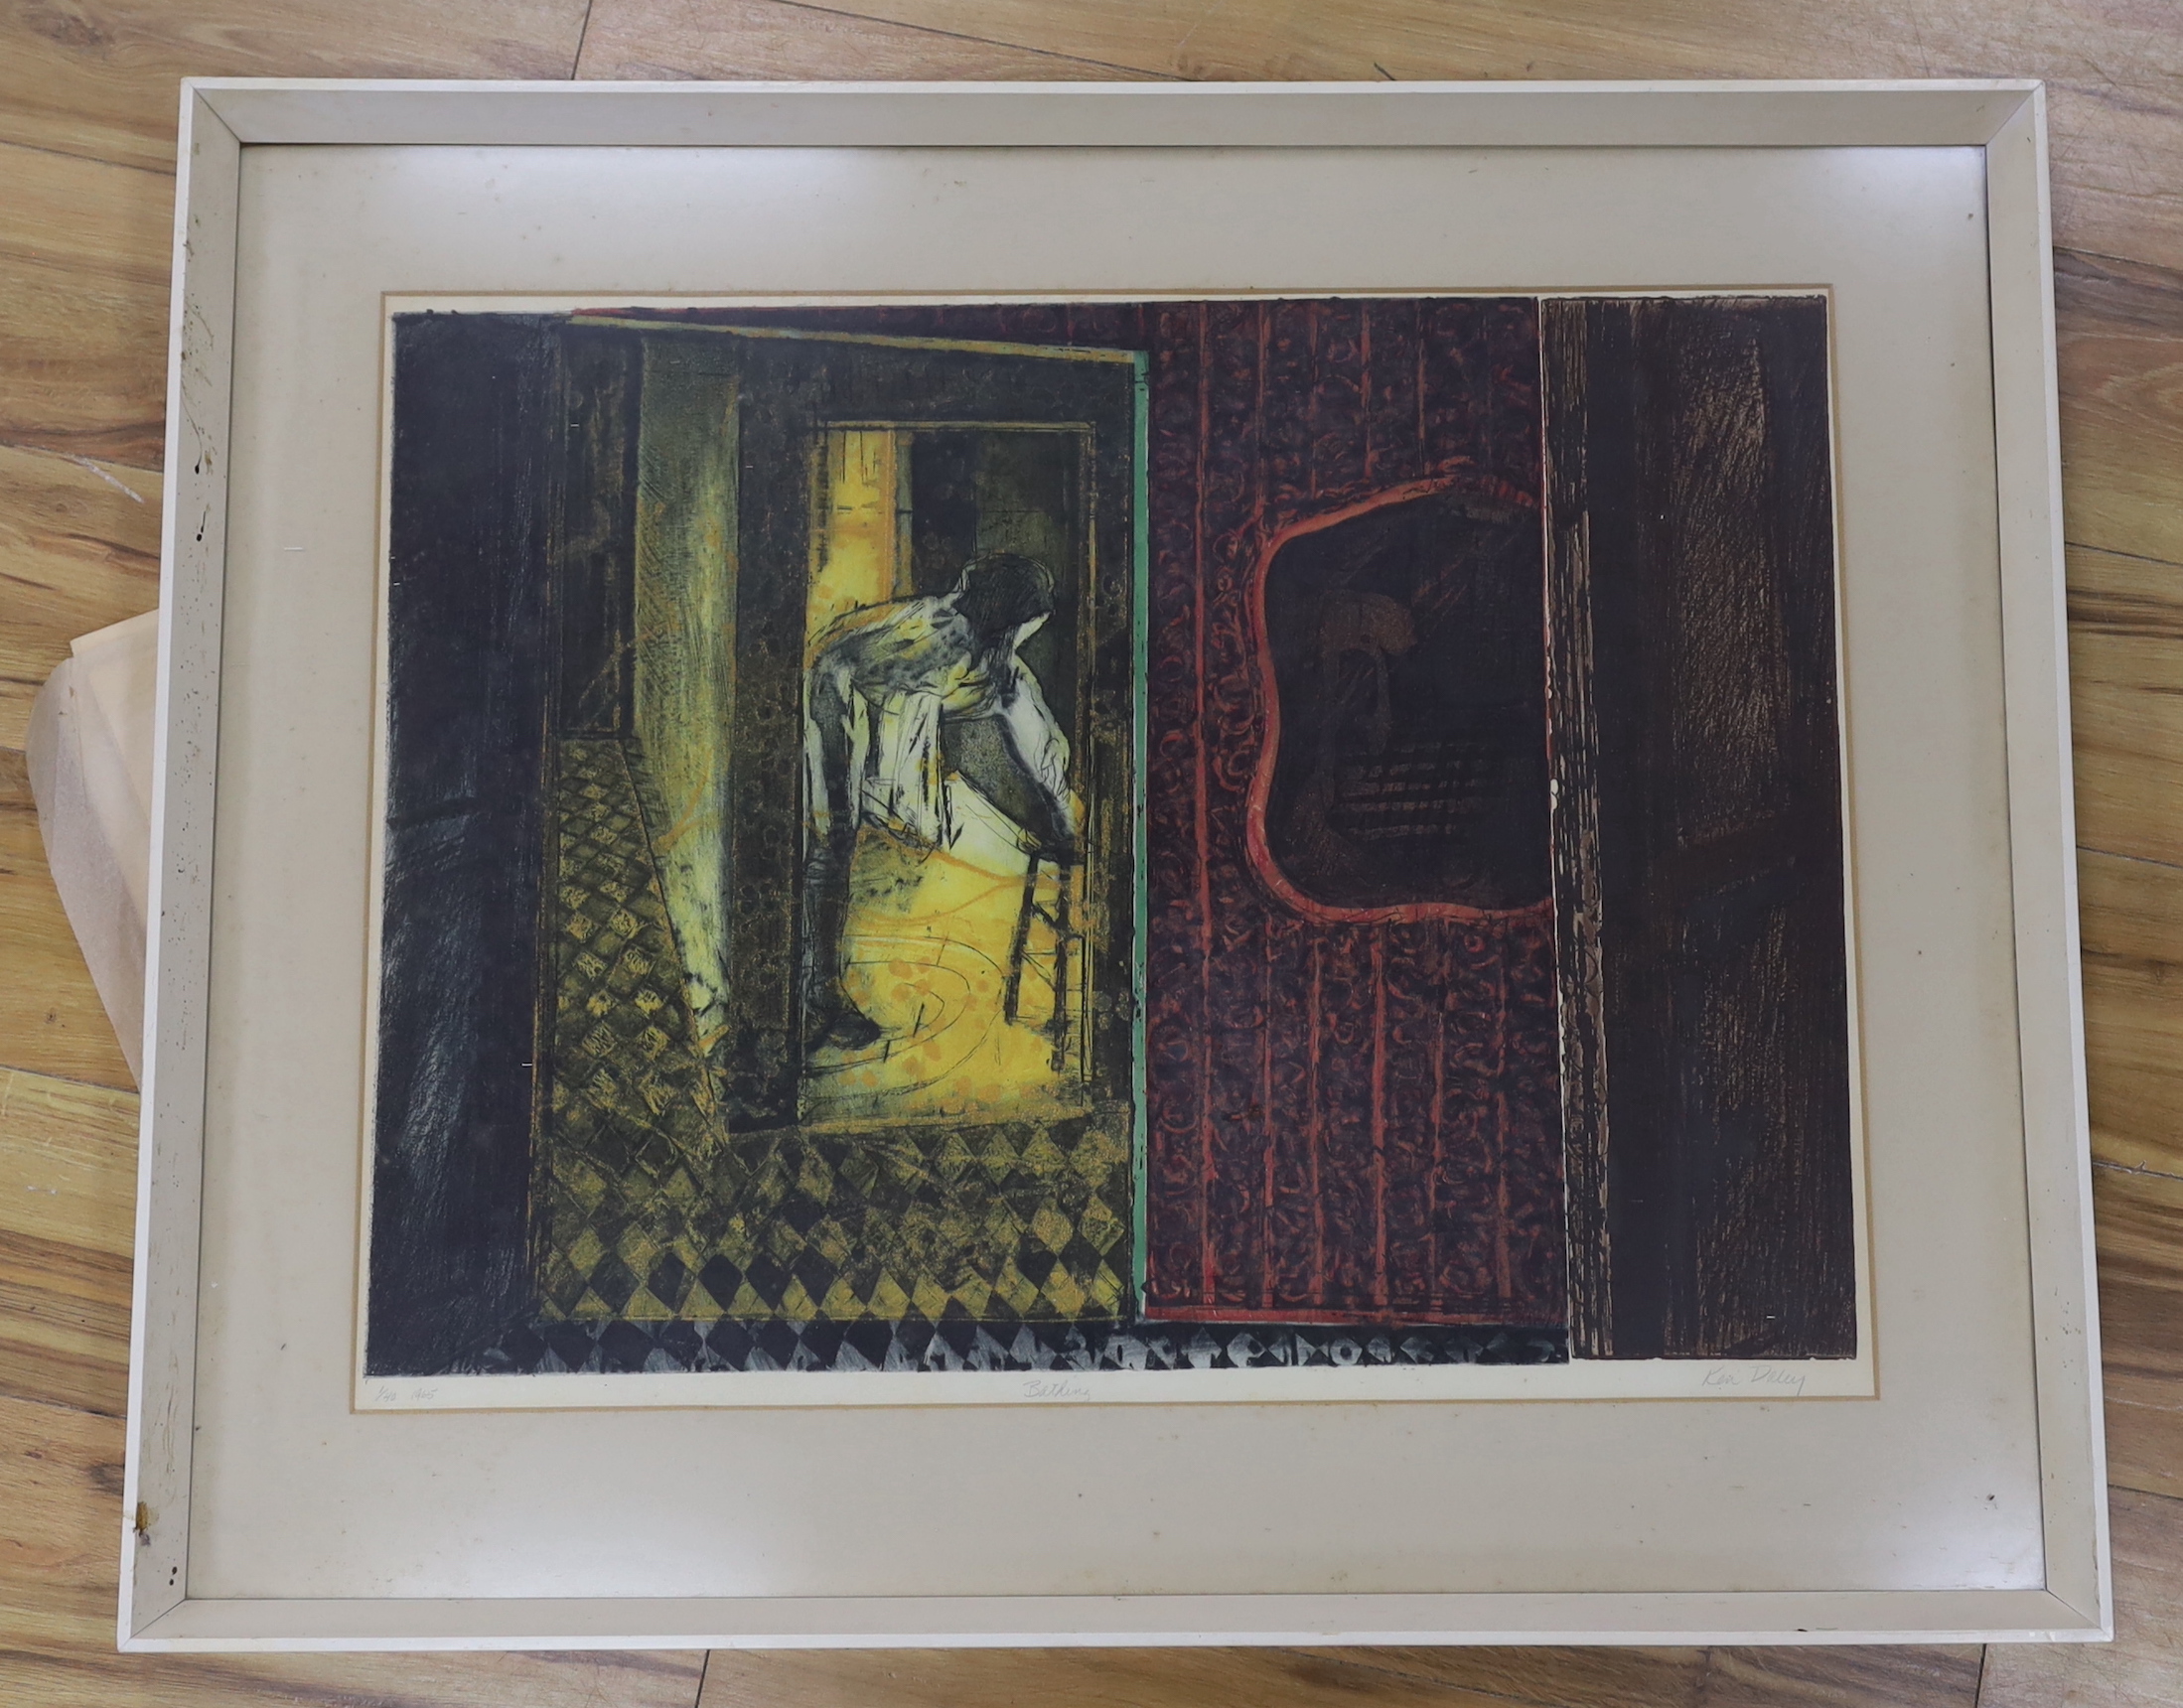 Ken Daley, colour etching, ‘Bathing’, signed in pencil and dated 1965, limited edition 1/40, 58 x 75cm